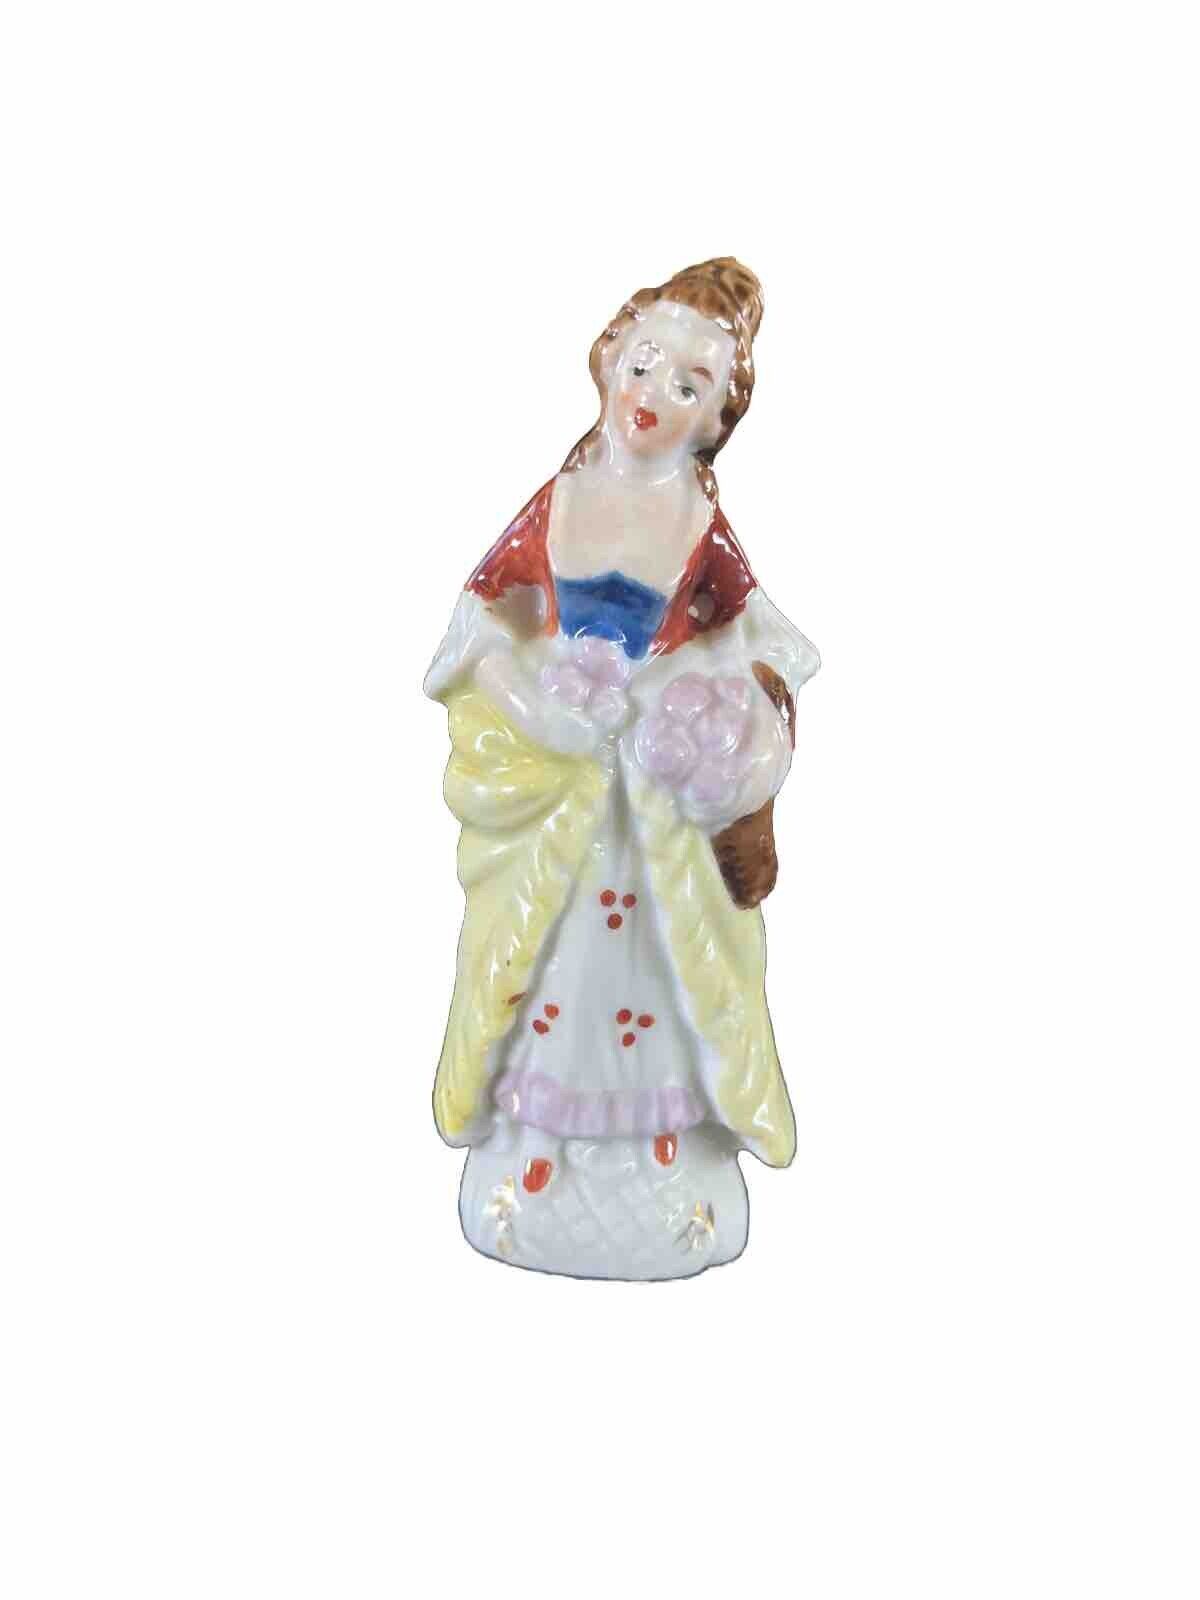 Vintage Antique Porcelain Figurine Woman Holding Peaches Made In Occupied JAPAN